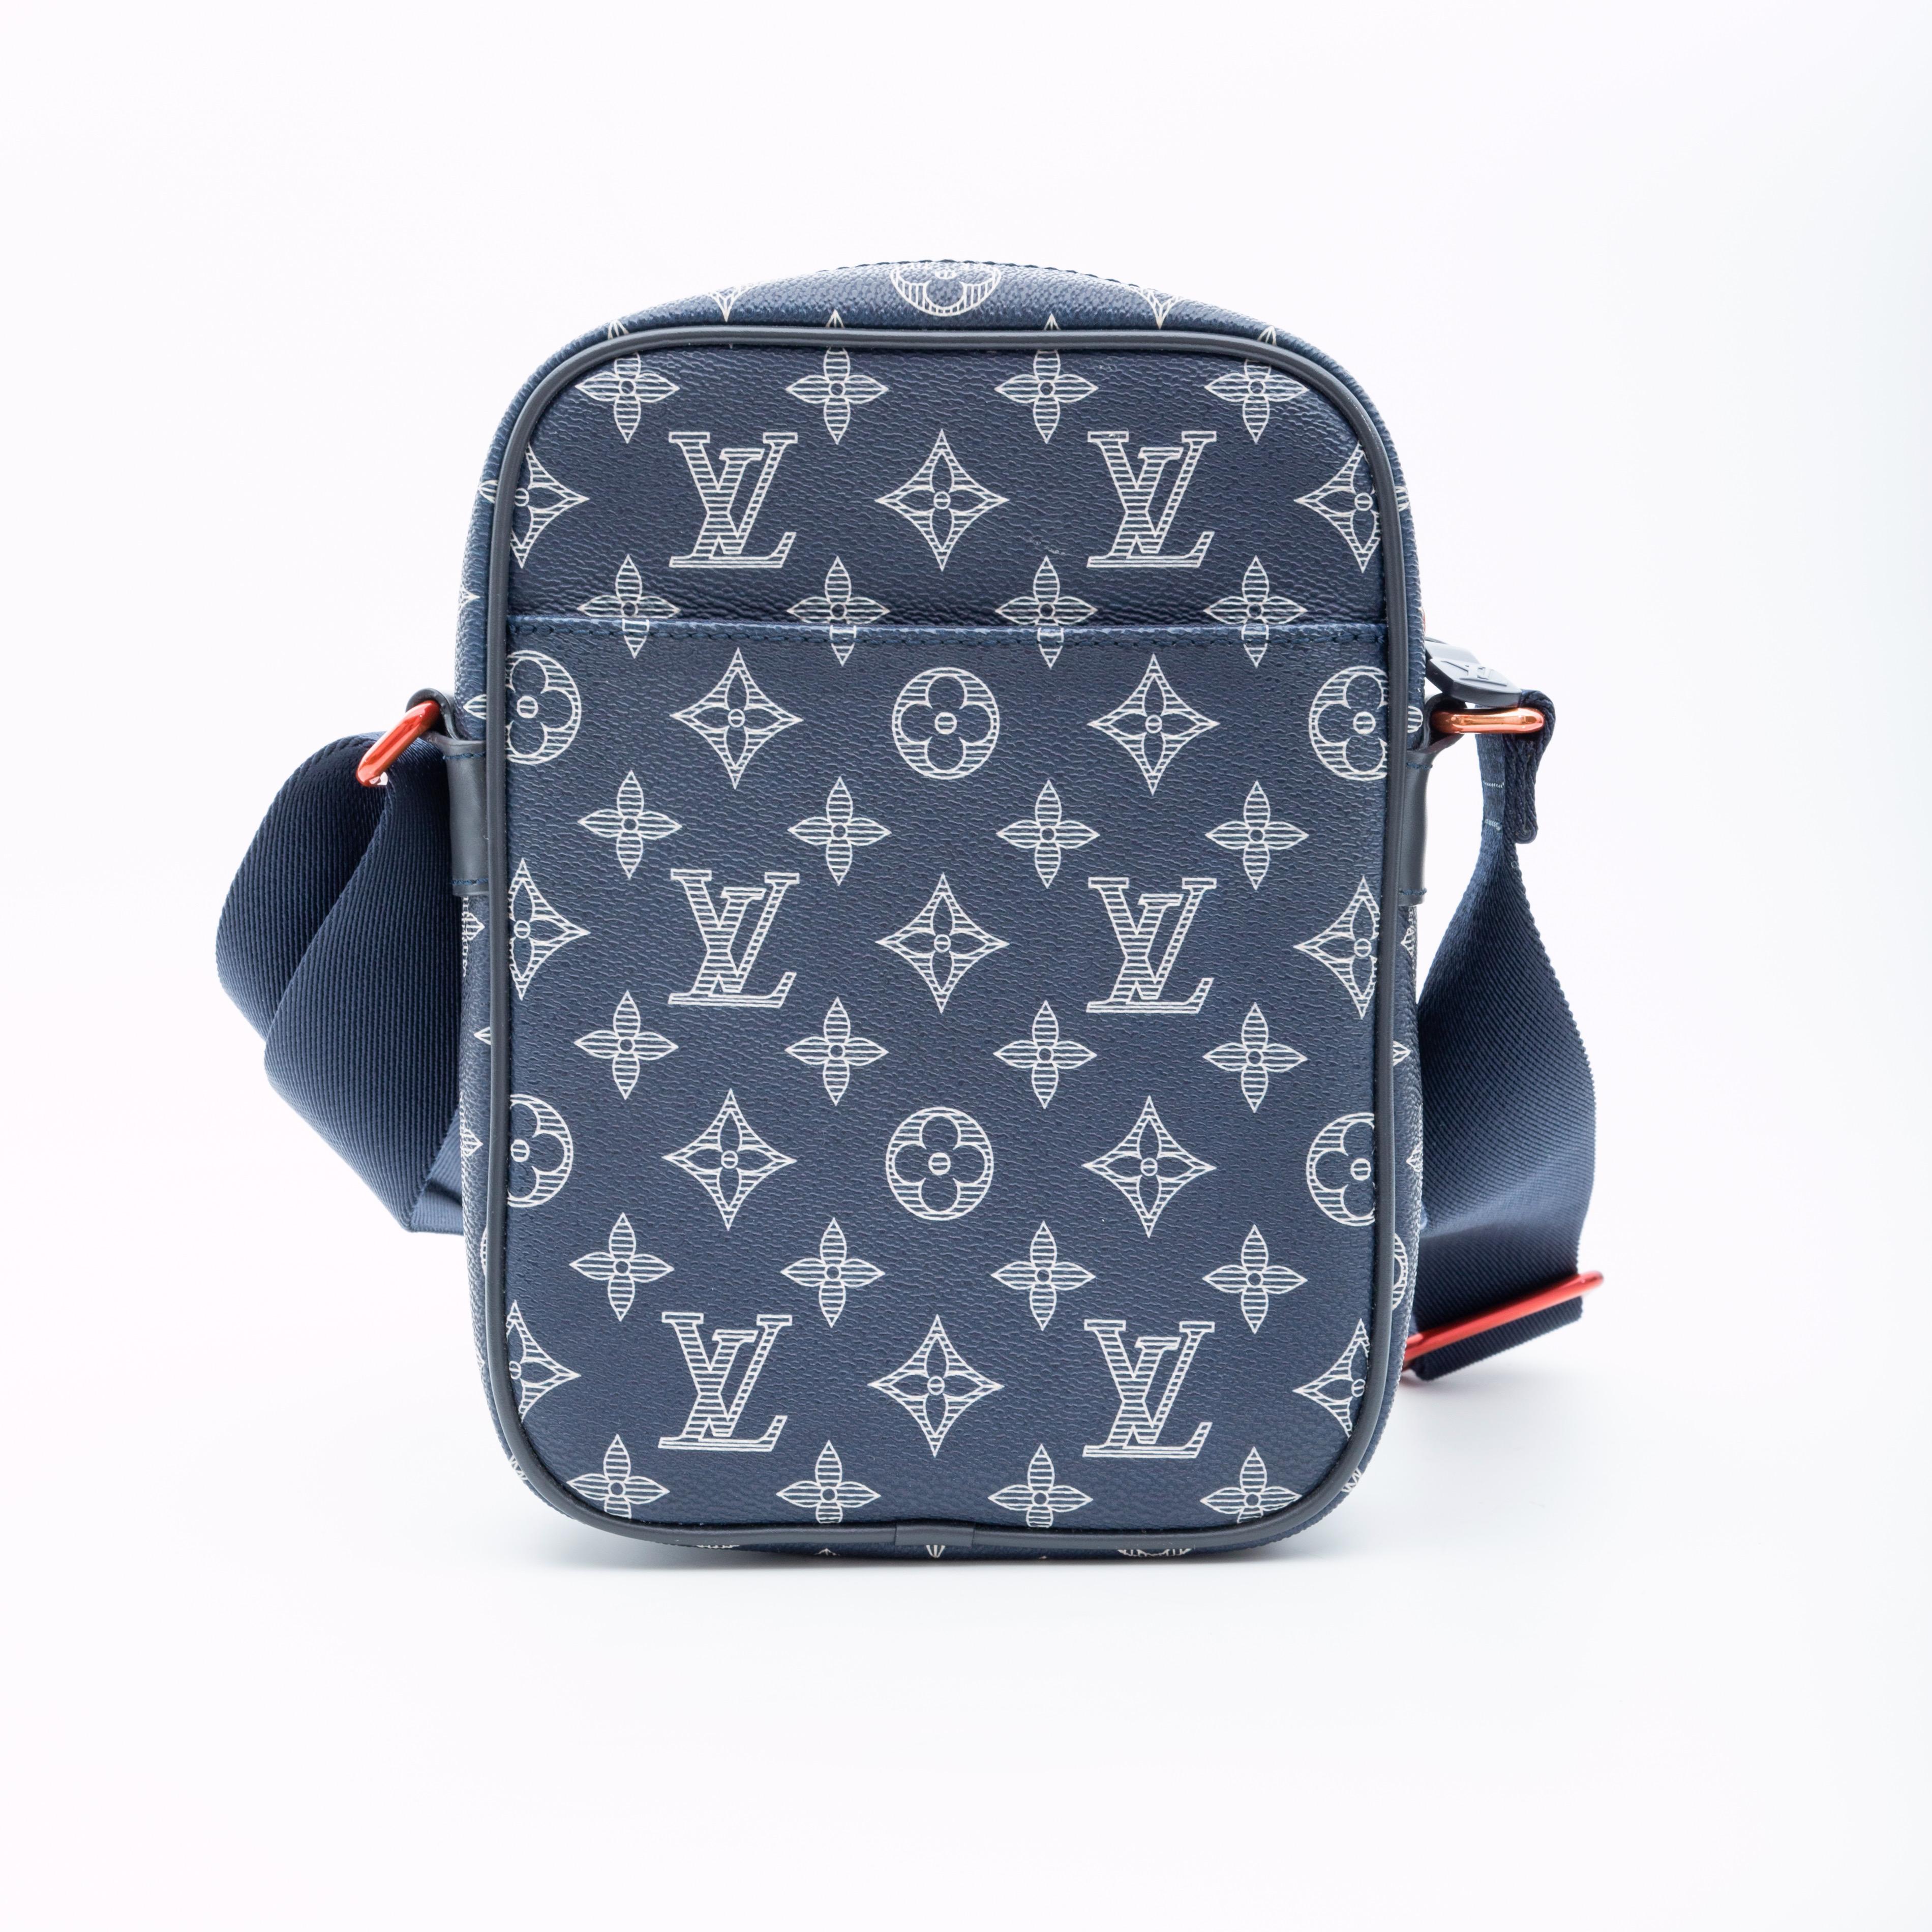 Designed by Kim Jones for the SS18 show and reflects his streetwear aesthetic. 
This messenger bag is made of monogram on dark blue/ white toile canvas. Featuring blue leather trim, a red upside down LV logo on the exterior, a waist-length blue